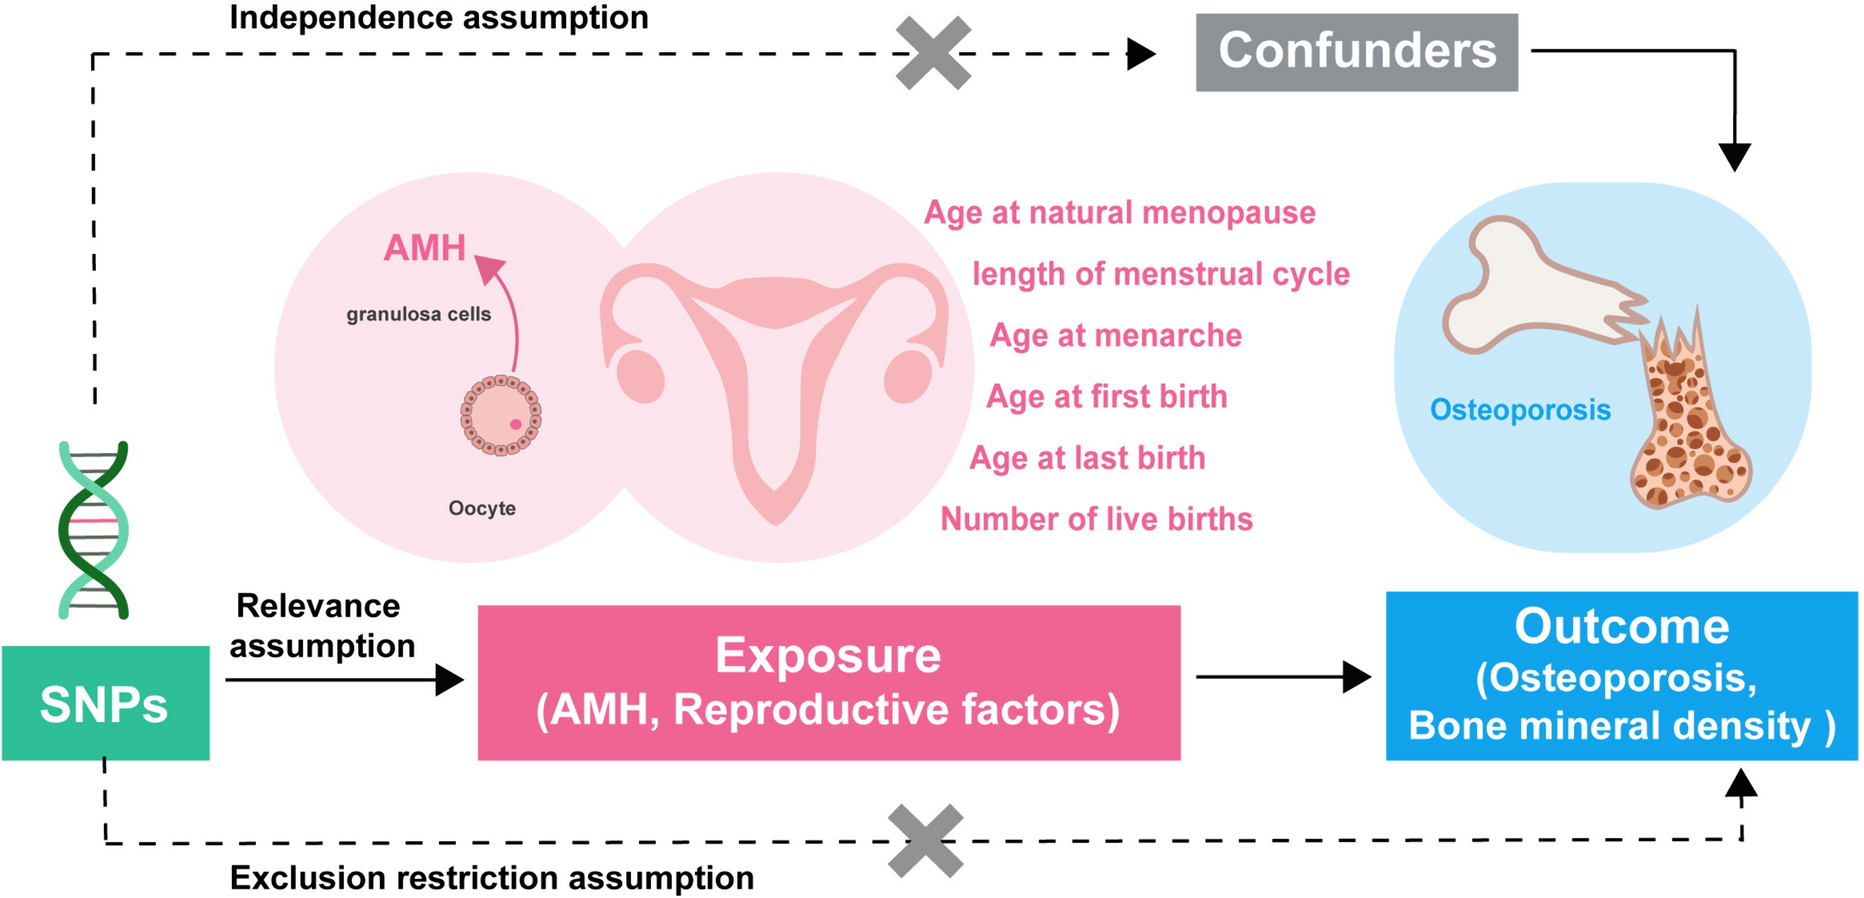 Genetic Prediction of Osteoporosis by Anti-Müllerian Hormone Levels and Reproductive Factors in Women: A Mendelian Randomization Study